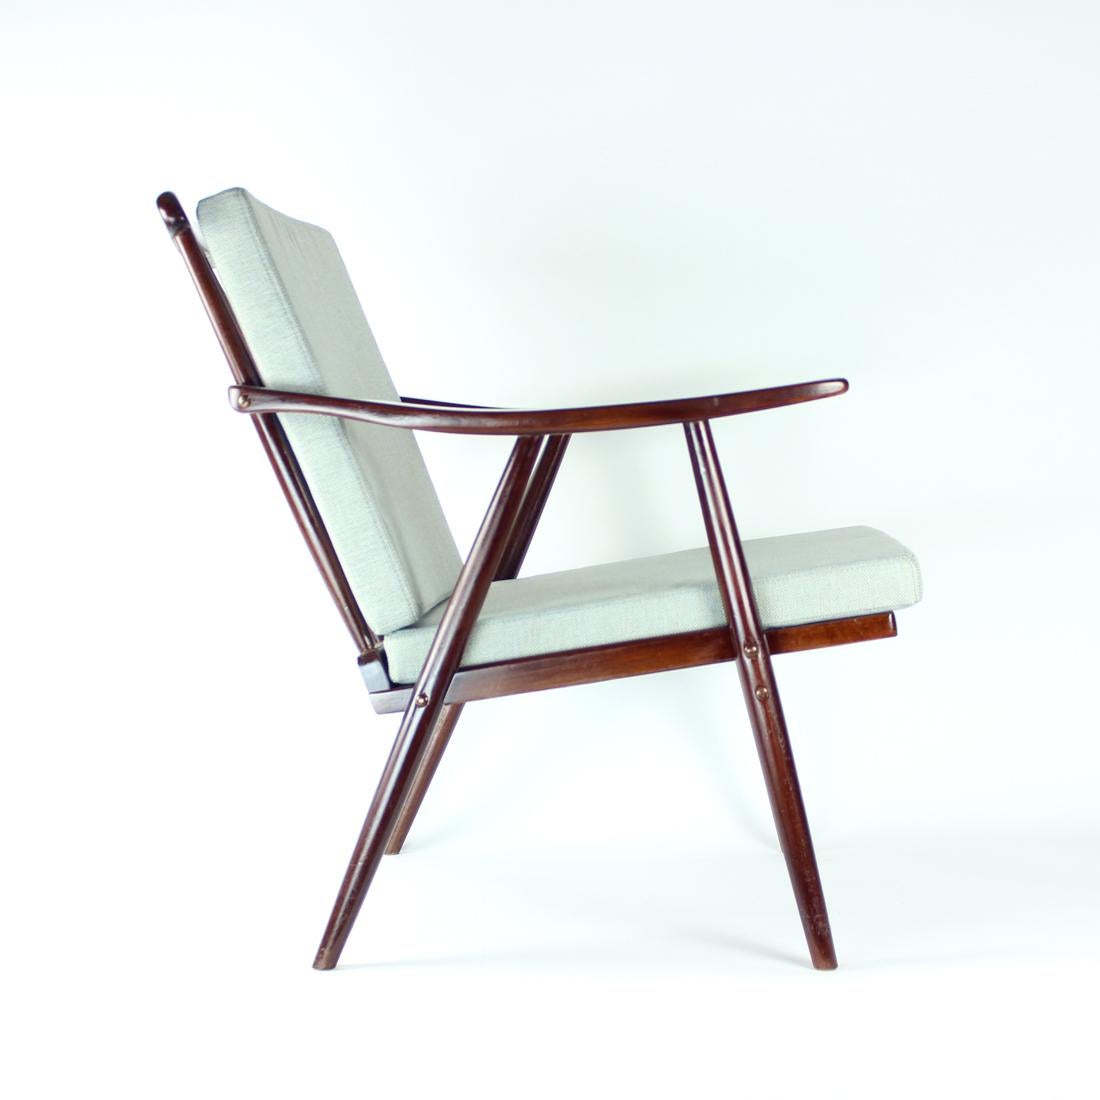 Iconic vintage armchair, also known as Booomerang armchair, produced by TON in 1960s. Original Thonet design. Produced by TON company in oak wood with beautiful bentwood details and craftsmanship. This armchair has been fully restored into a dark